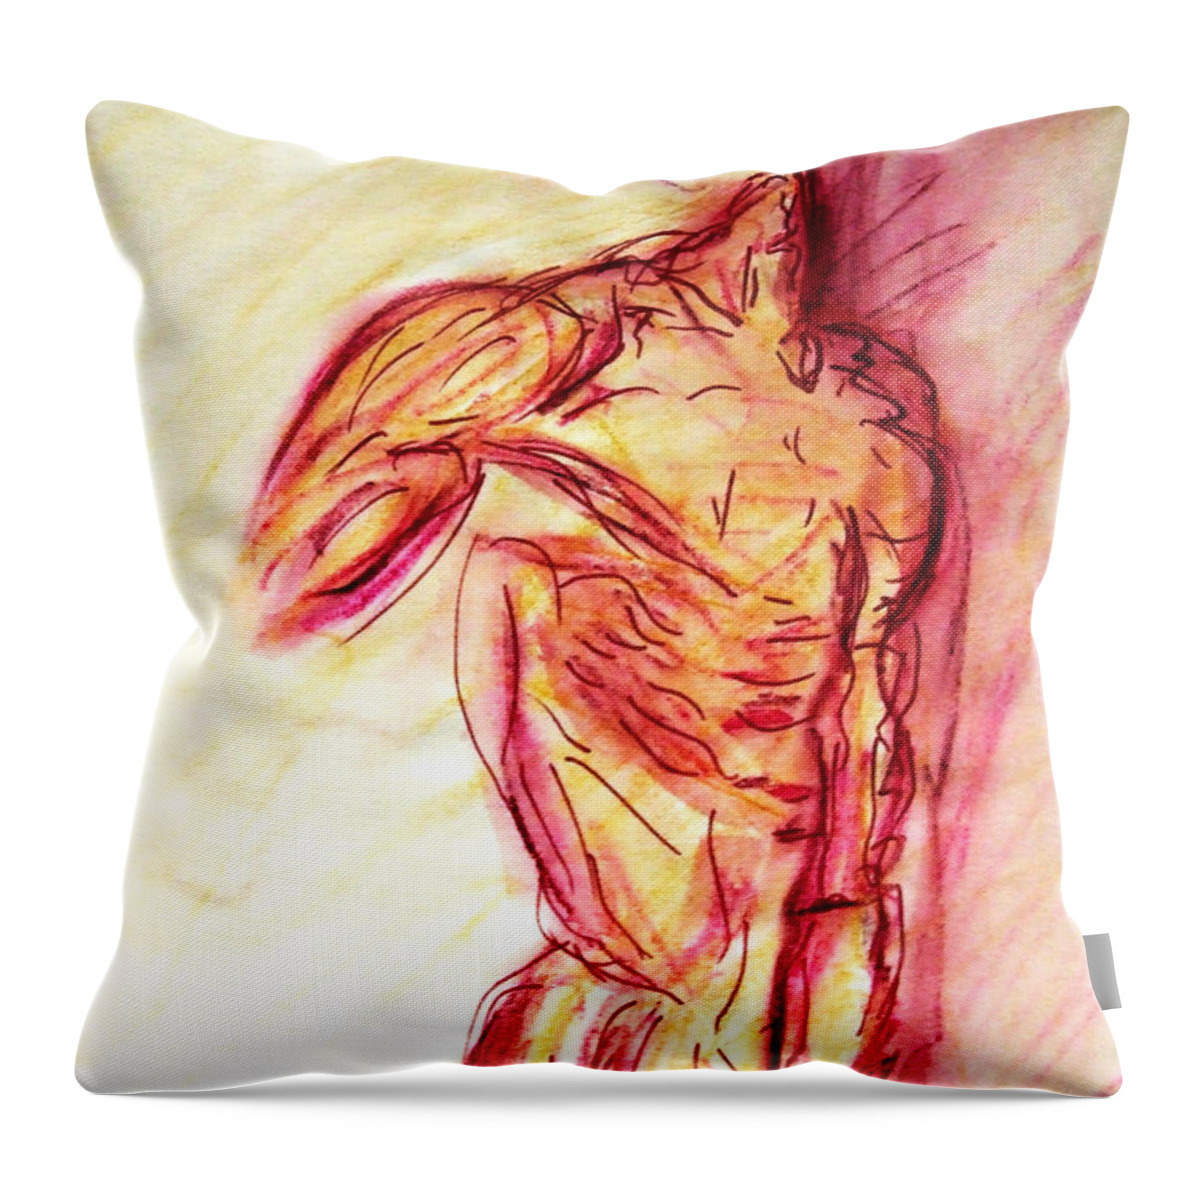 Custom Throw Pillow featuring the painting Classic Muscle Male Nude Looking Over Shoulder Sketch in a Sensual Primal Erotic Timeless Master Art by M Zimmerman